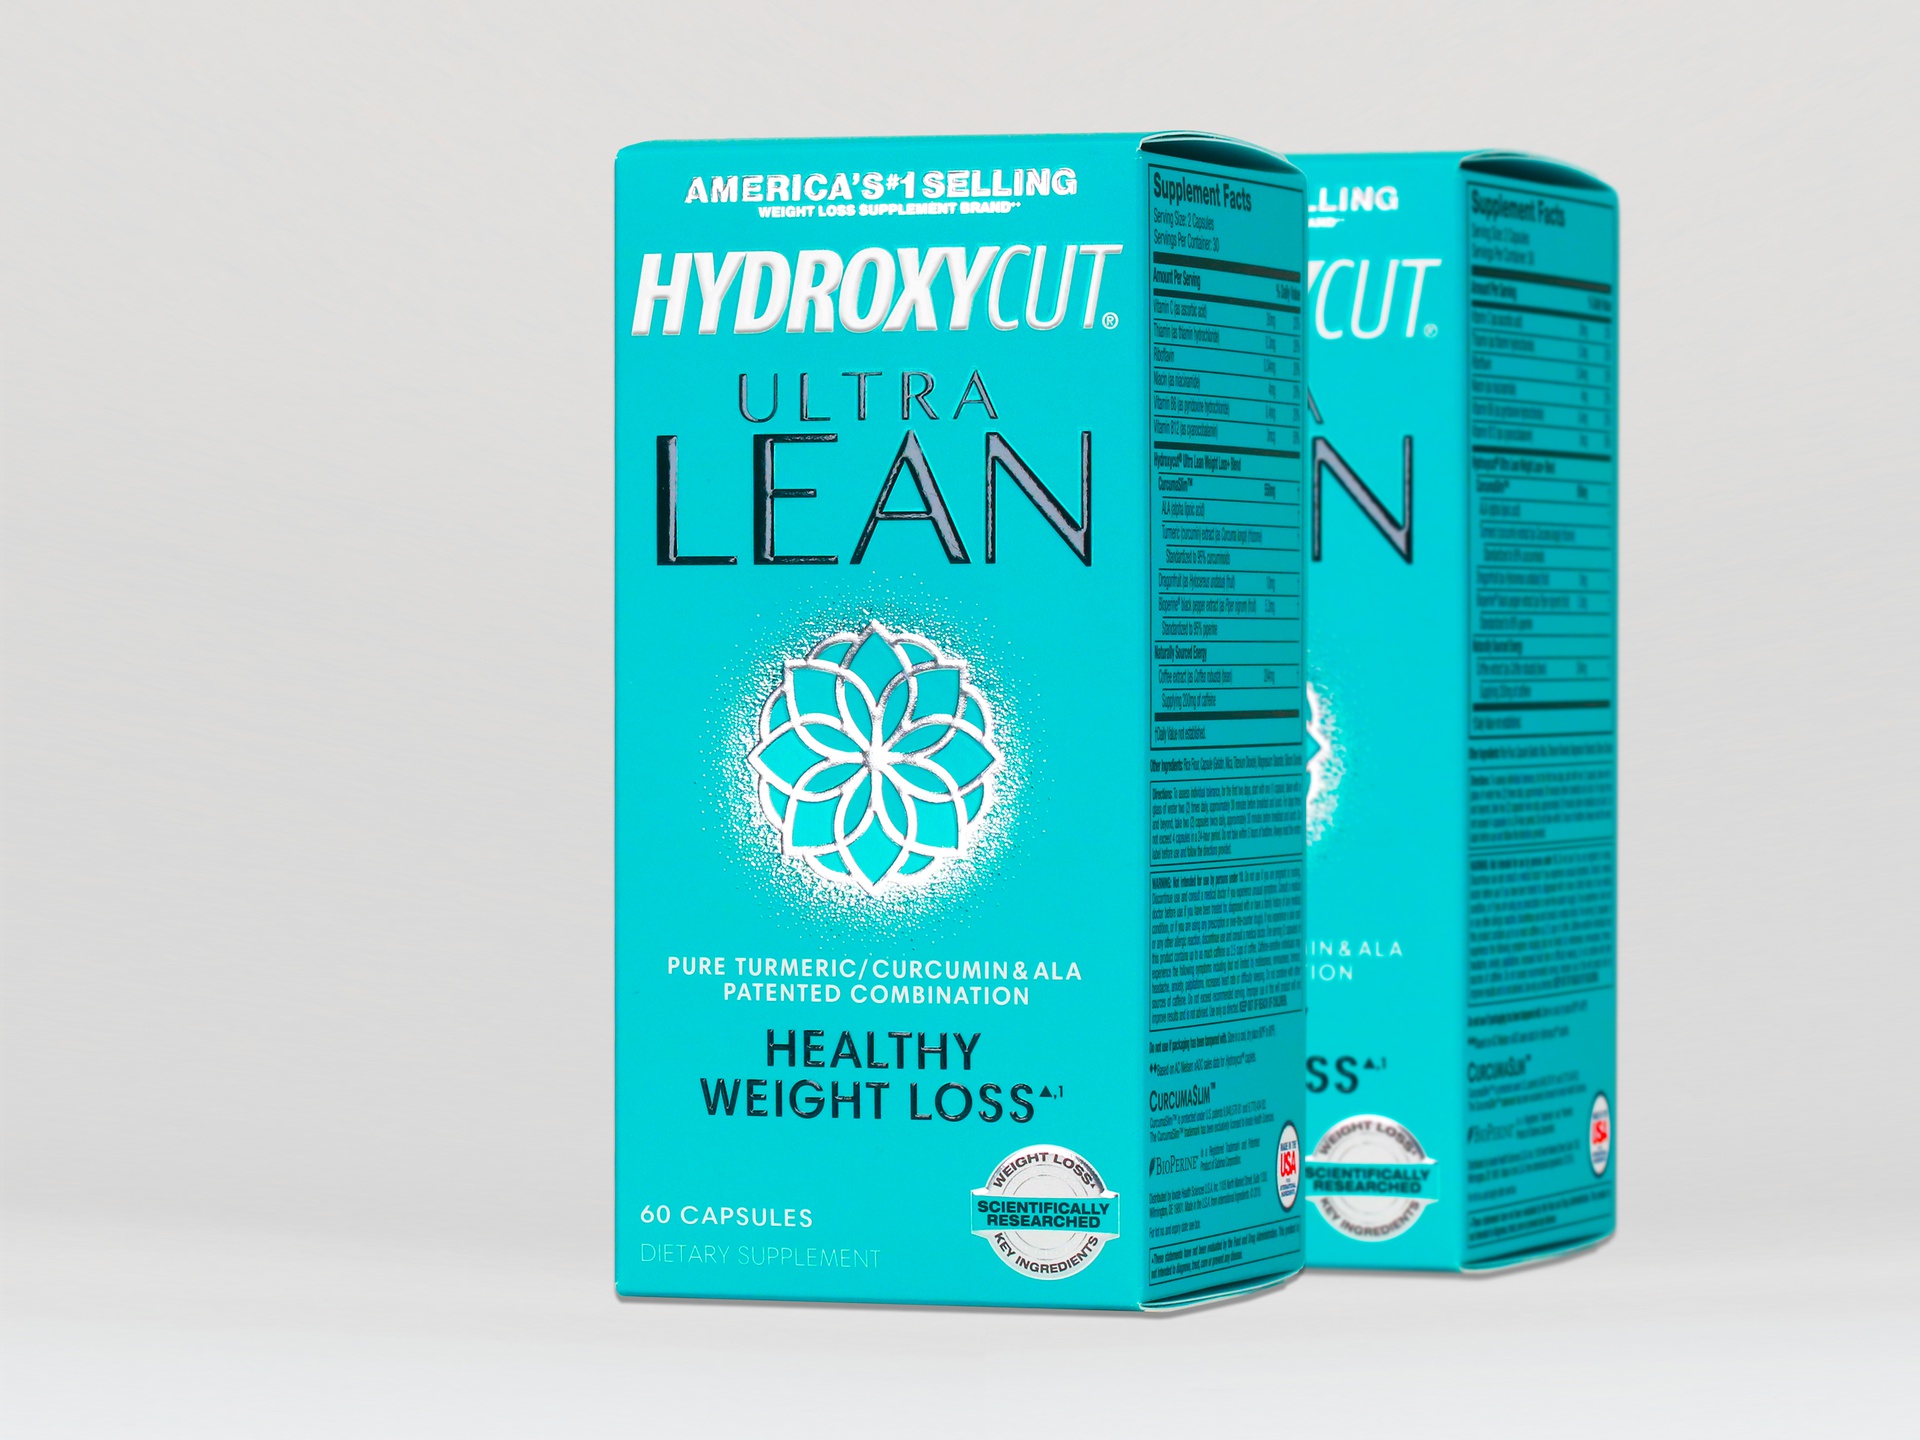 Hydroxycut Ultra Lean packaging features soft touch coating, cold foiling, and embossing.